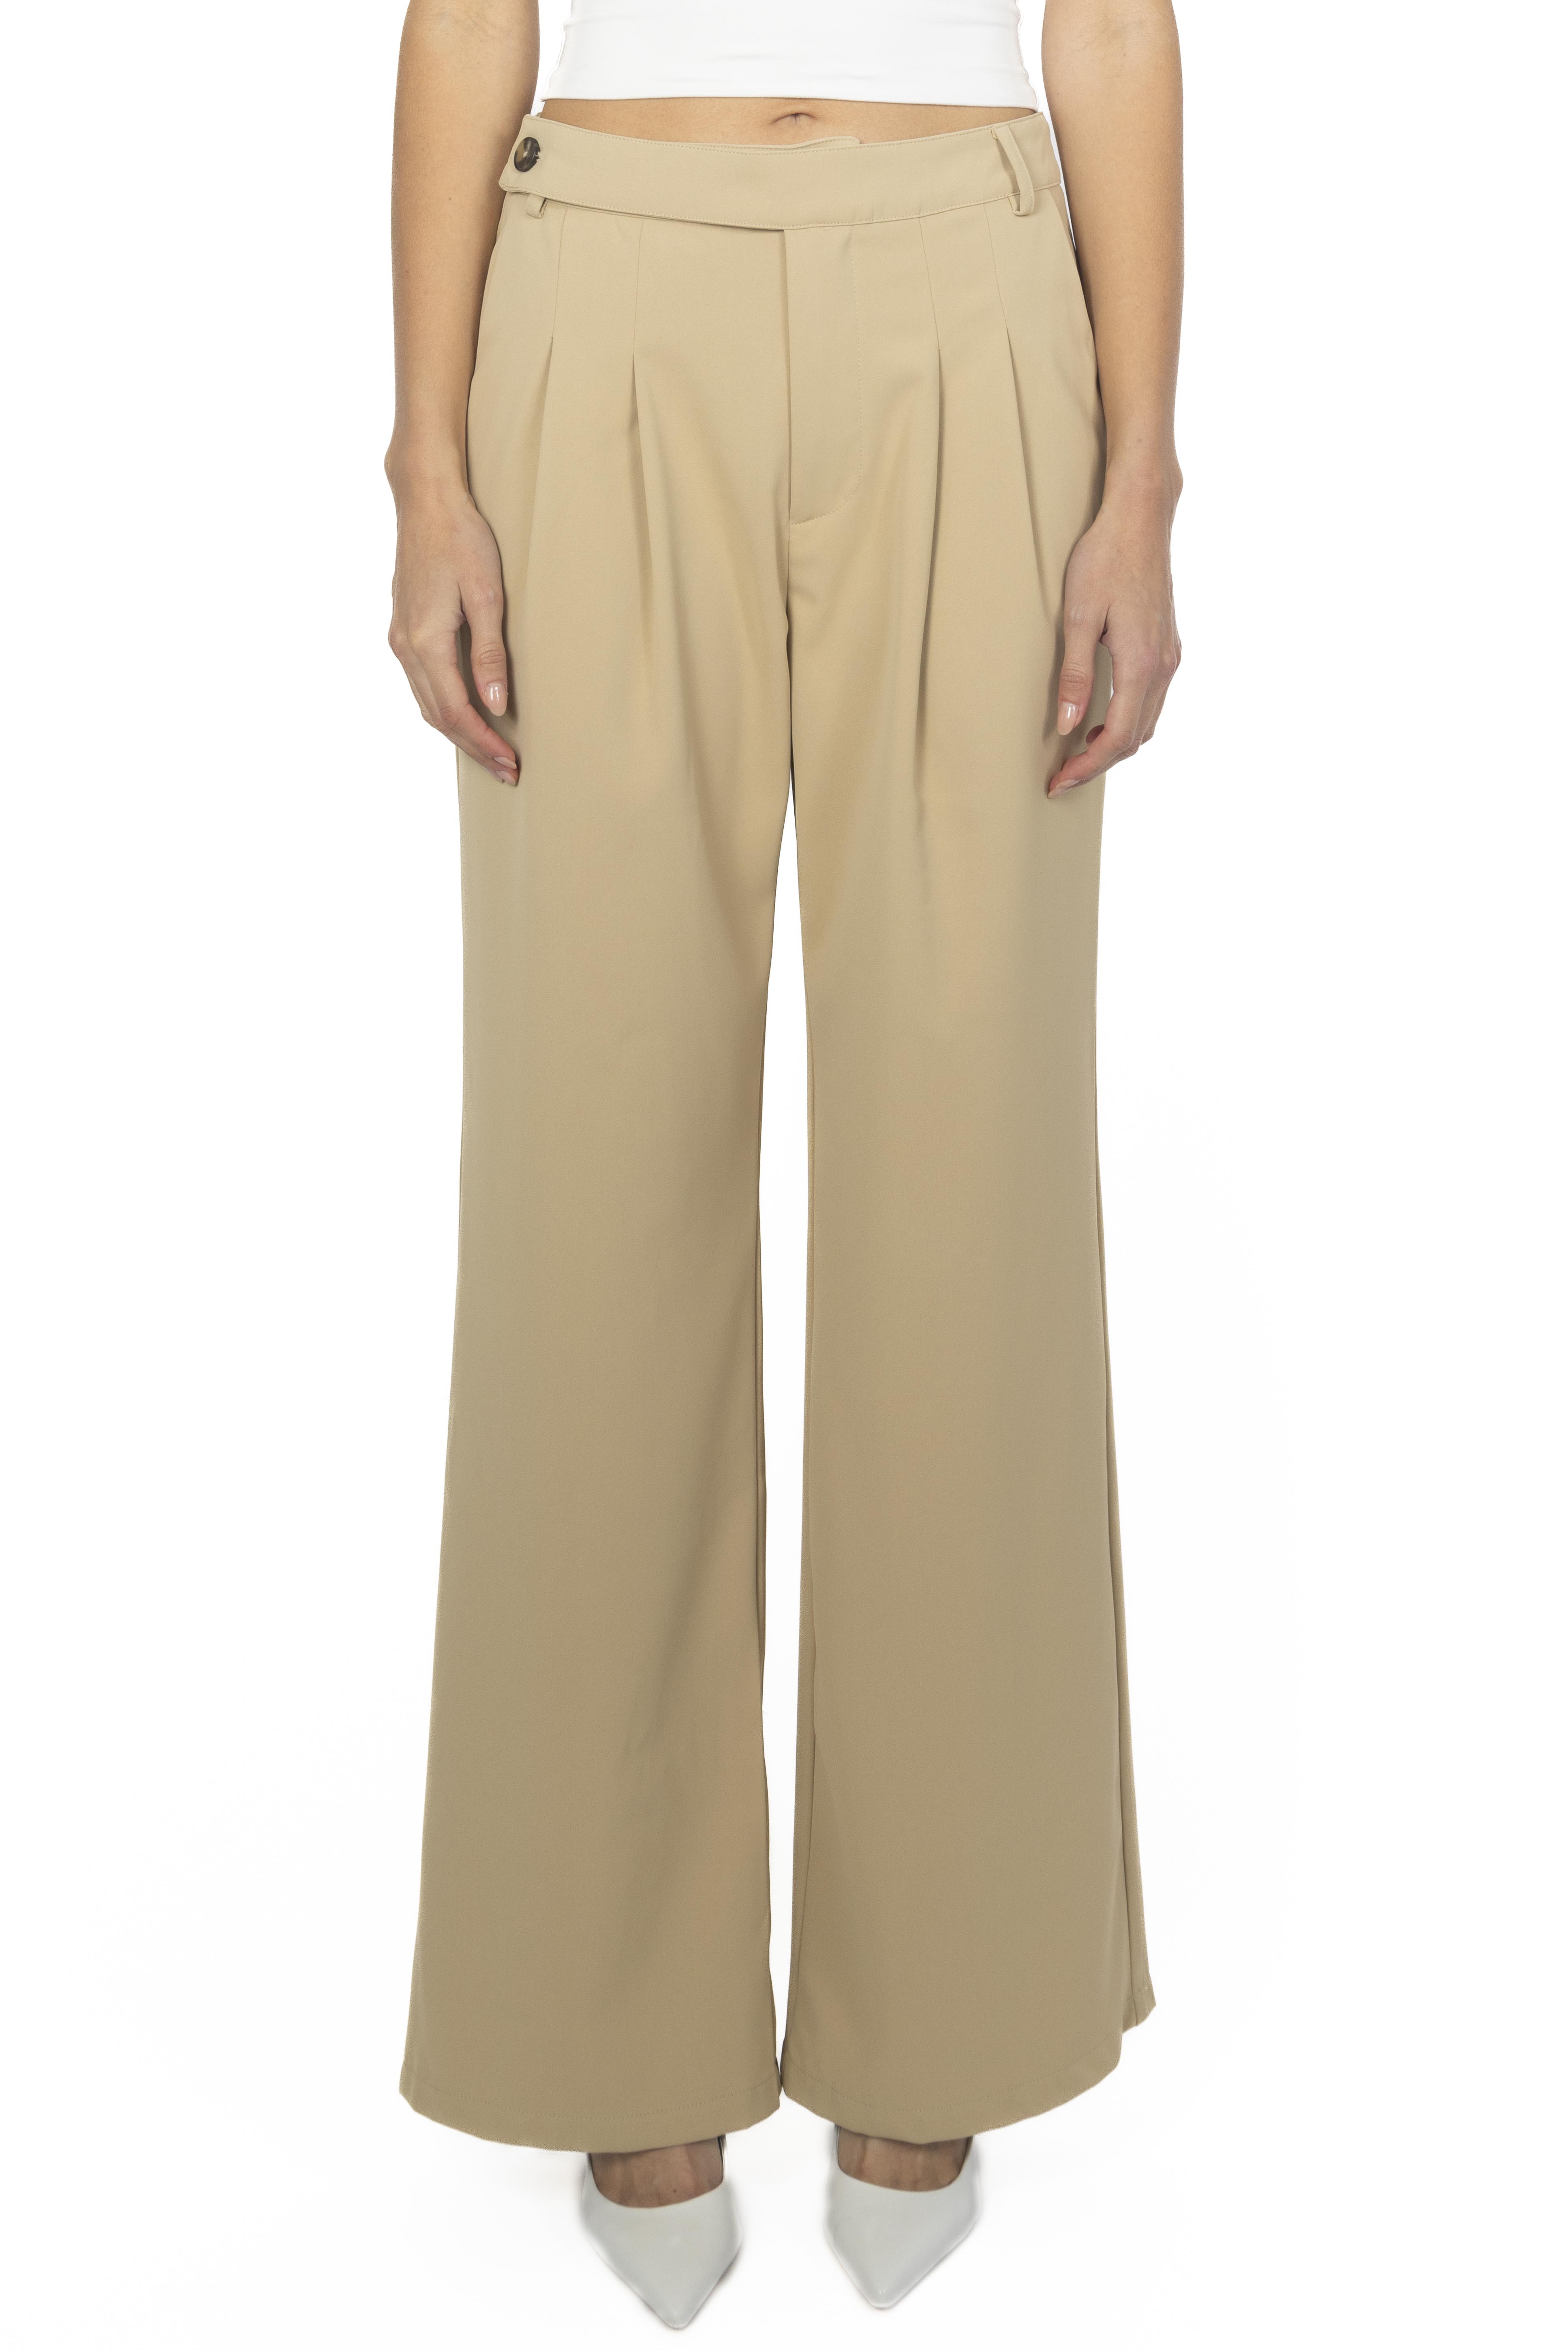 ALEXY TAUPE PANTS